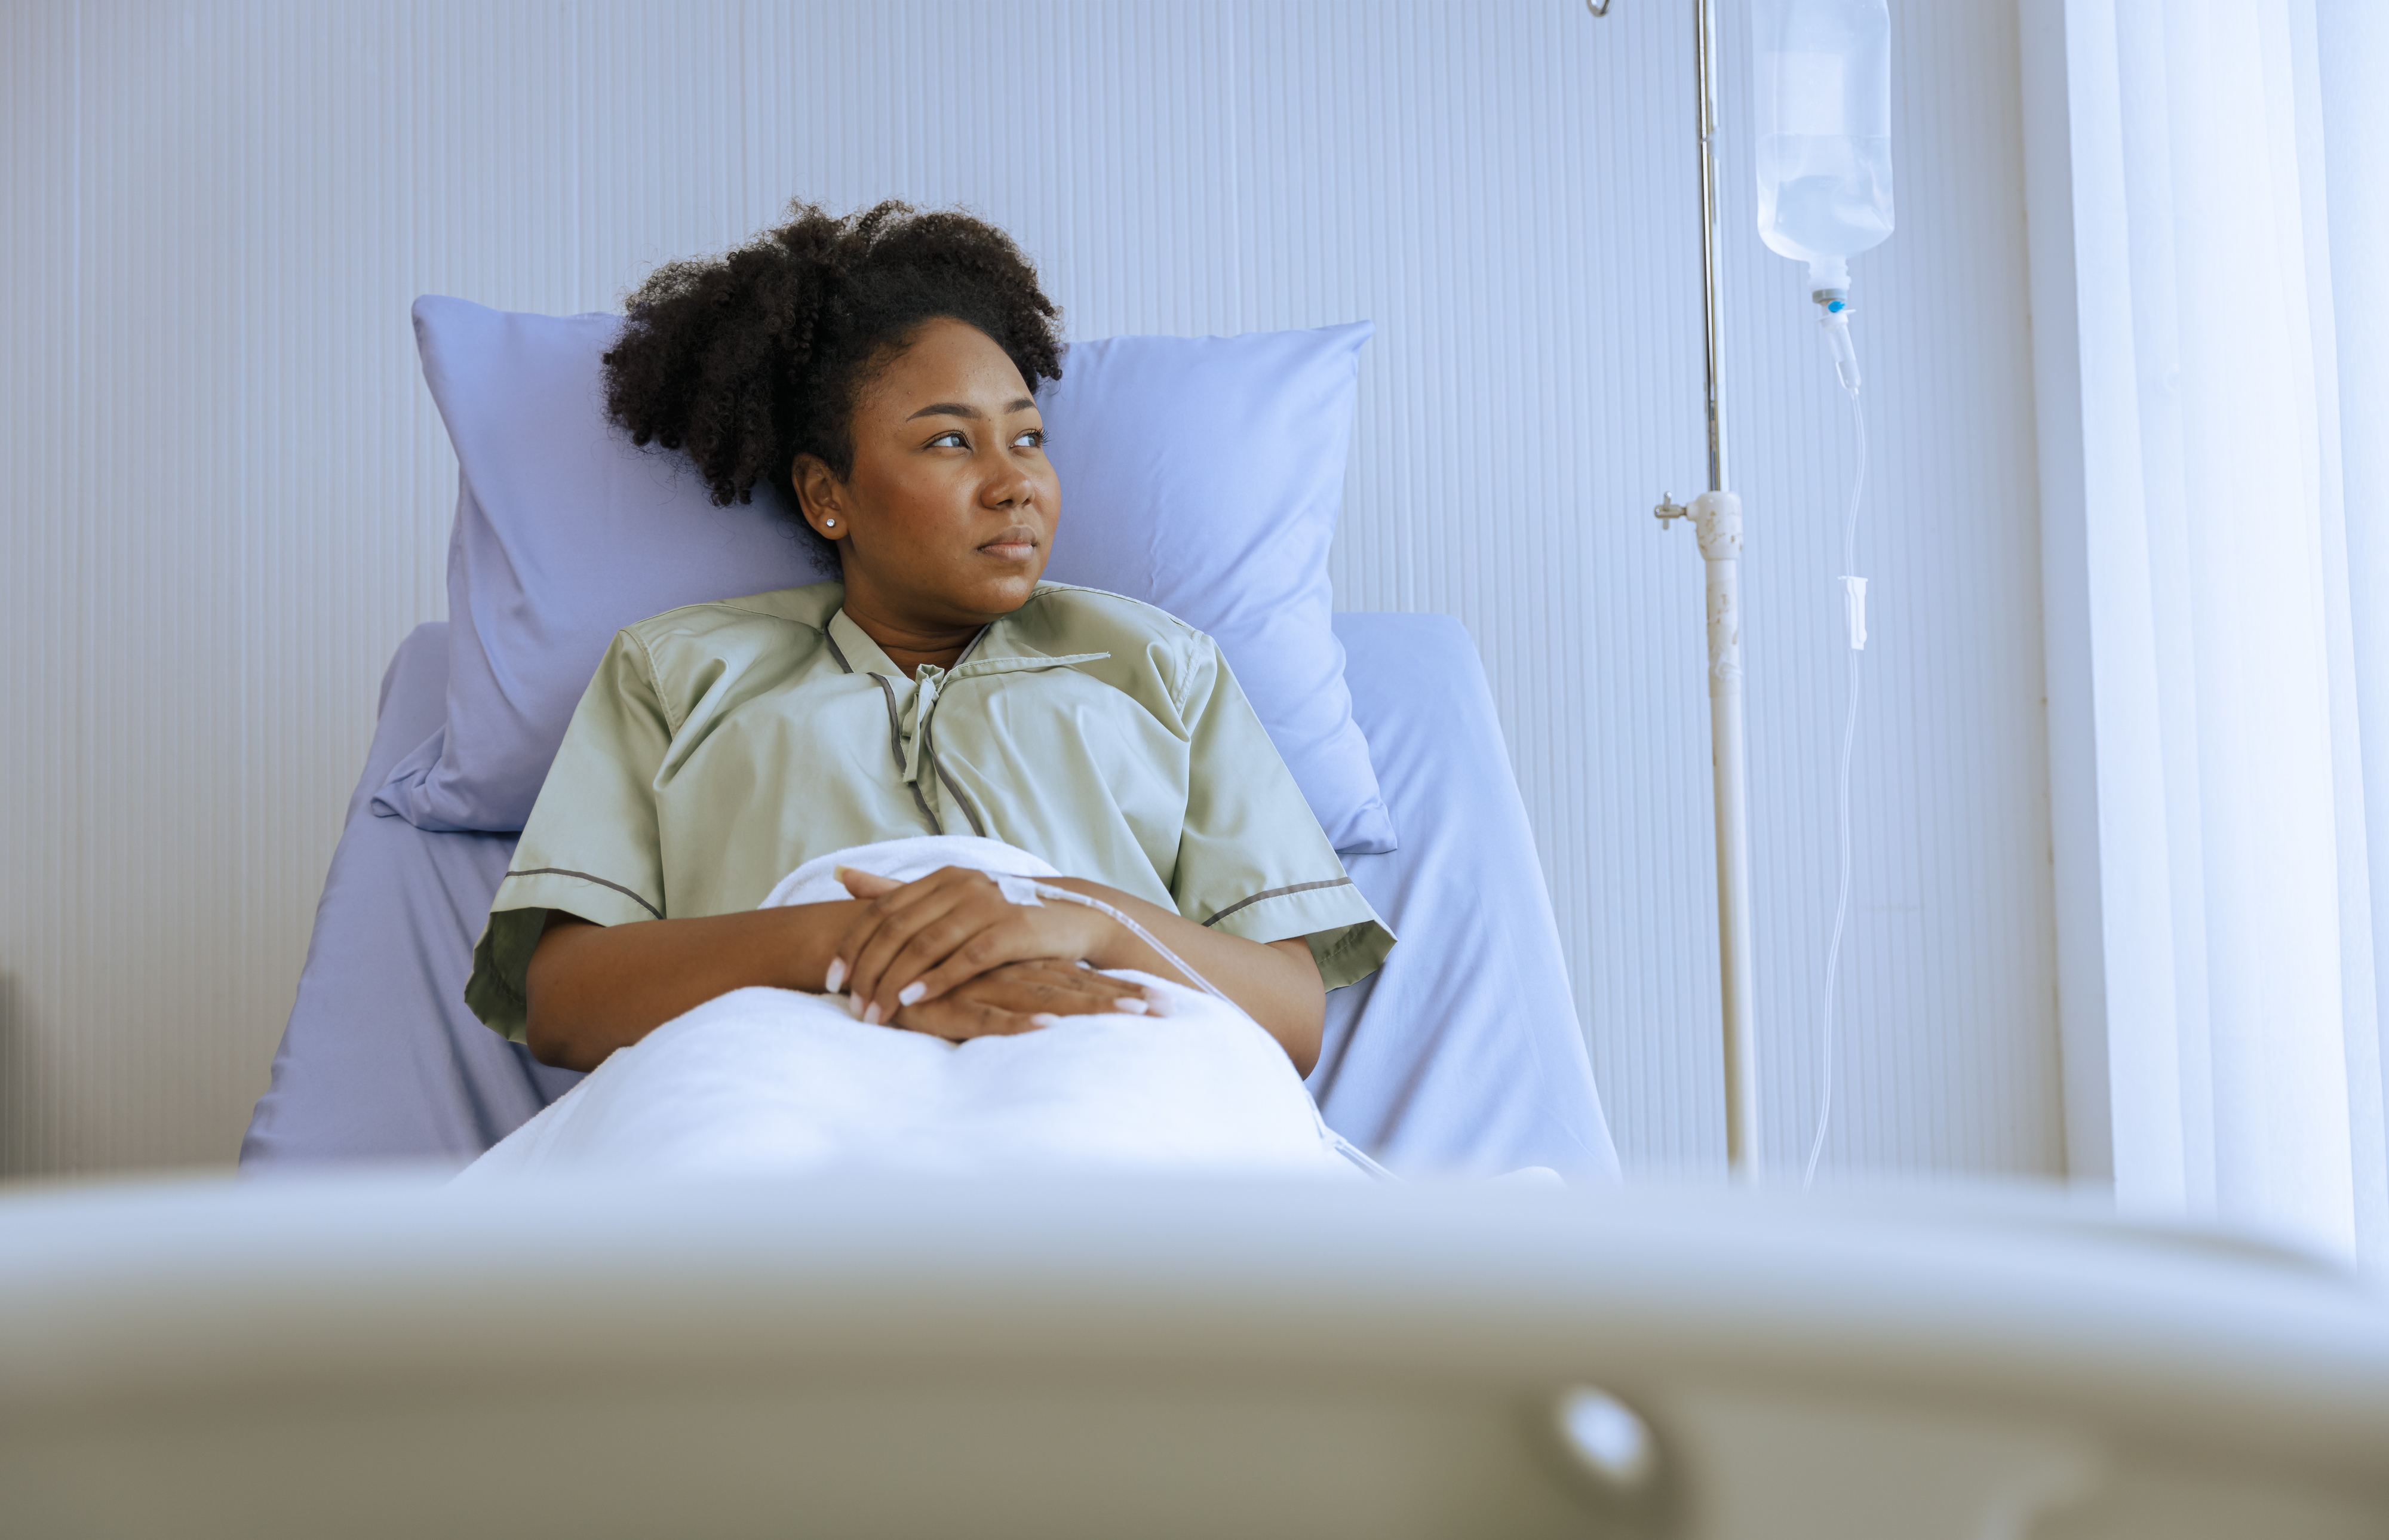 Woman in a hospital bed looking to the side with an IV stand in the background